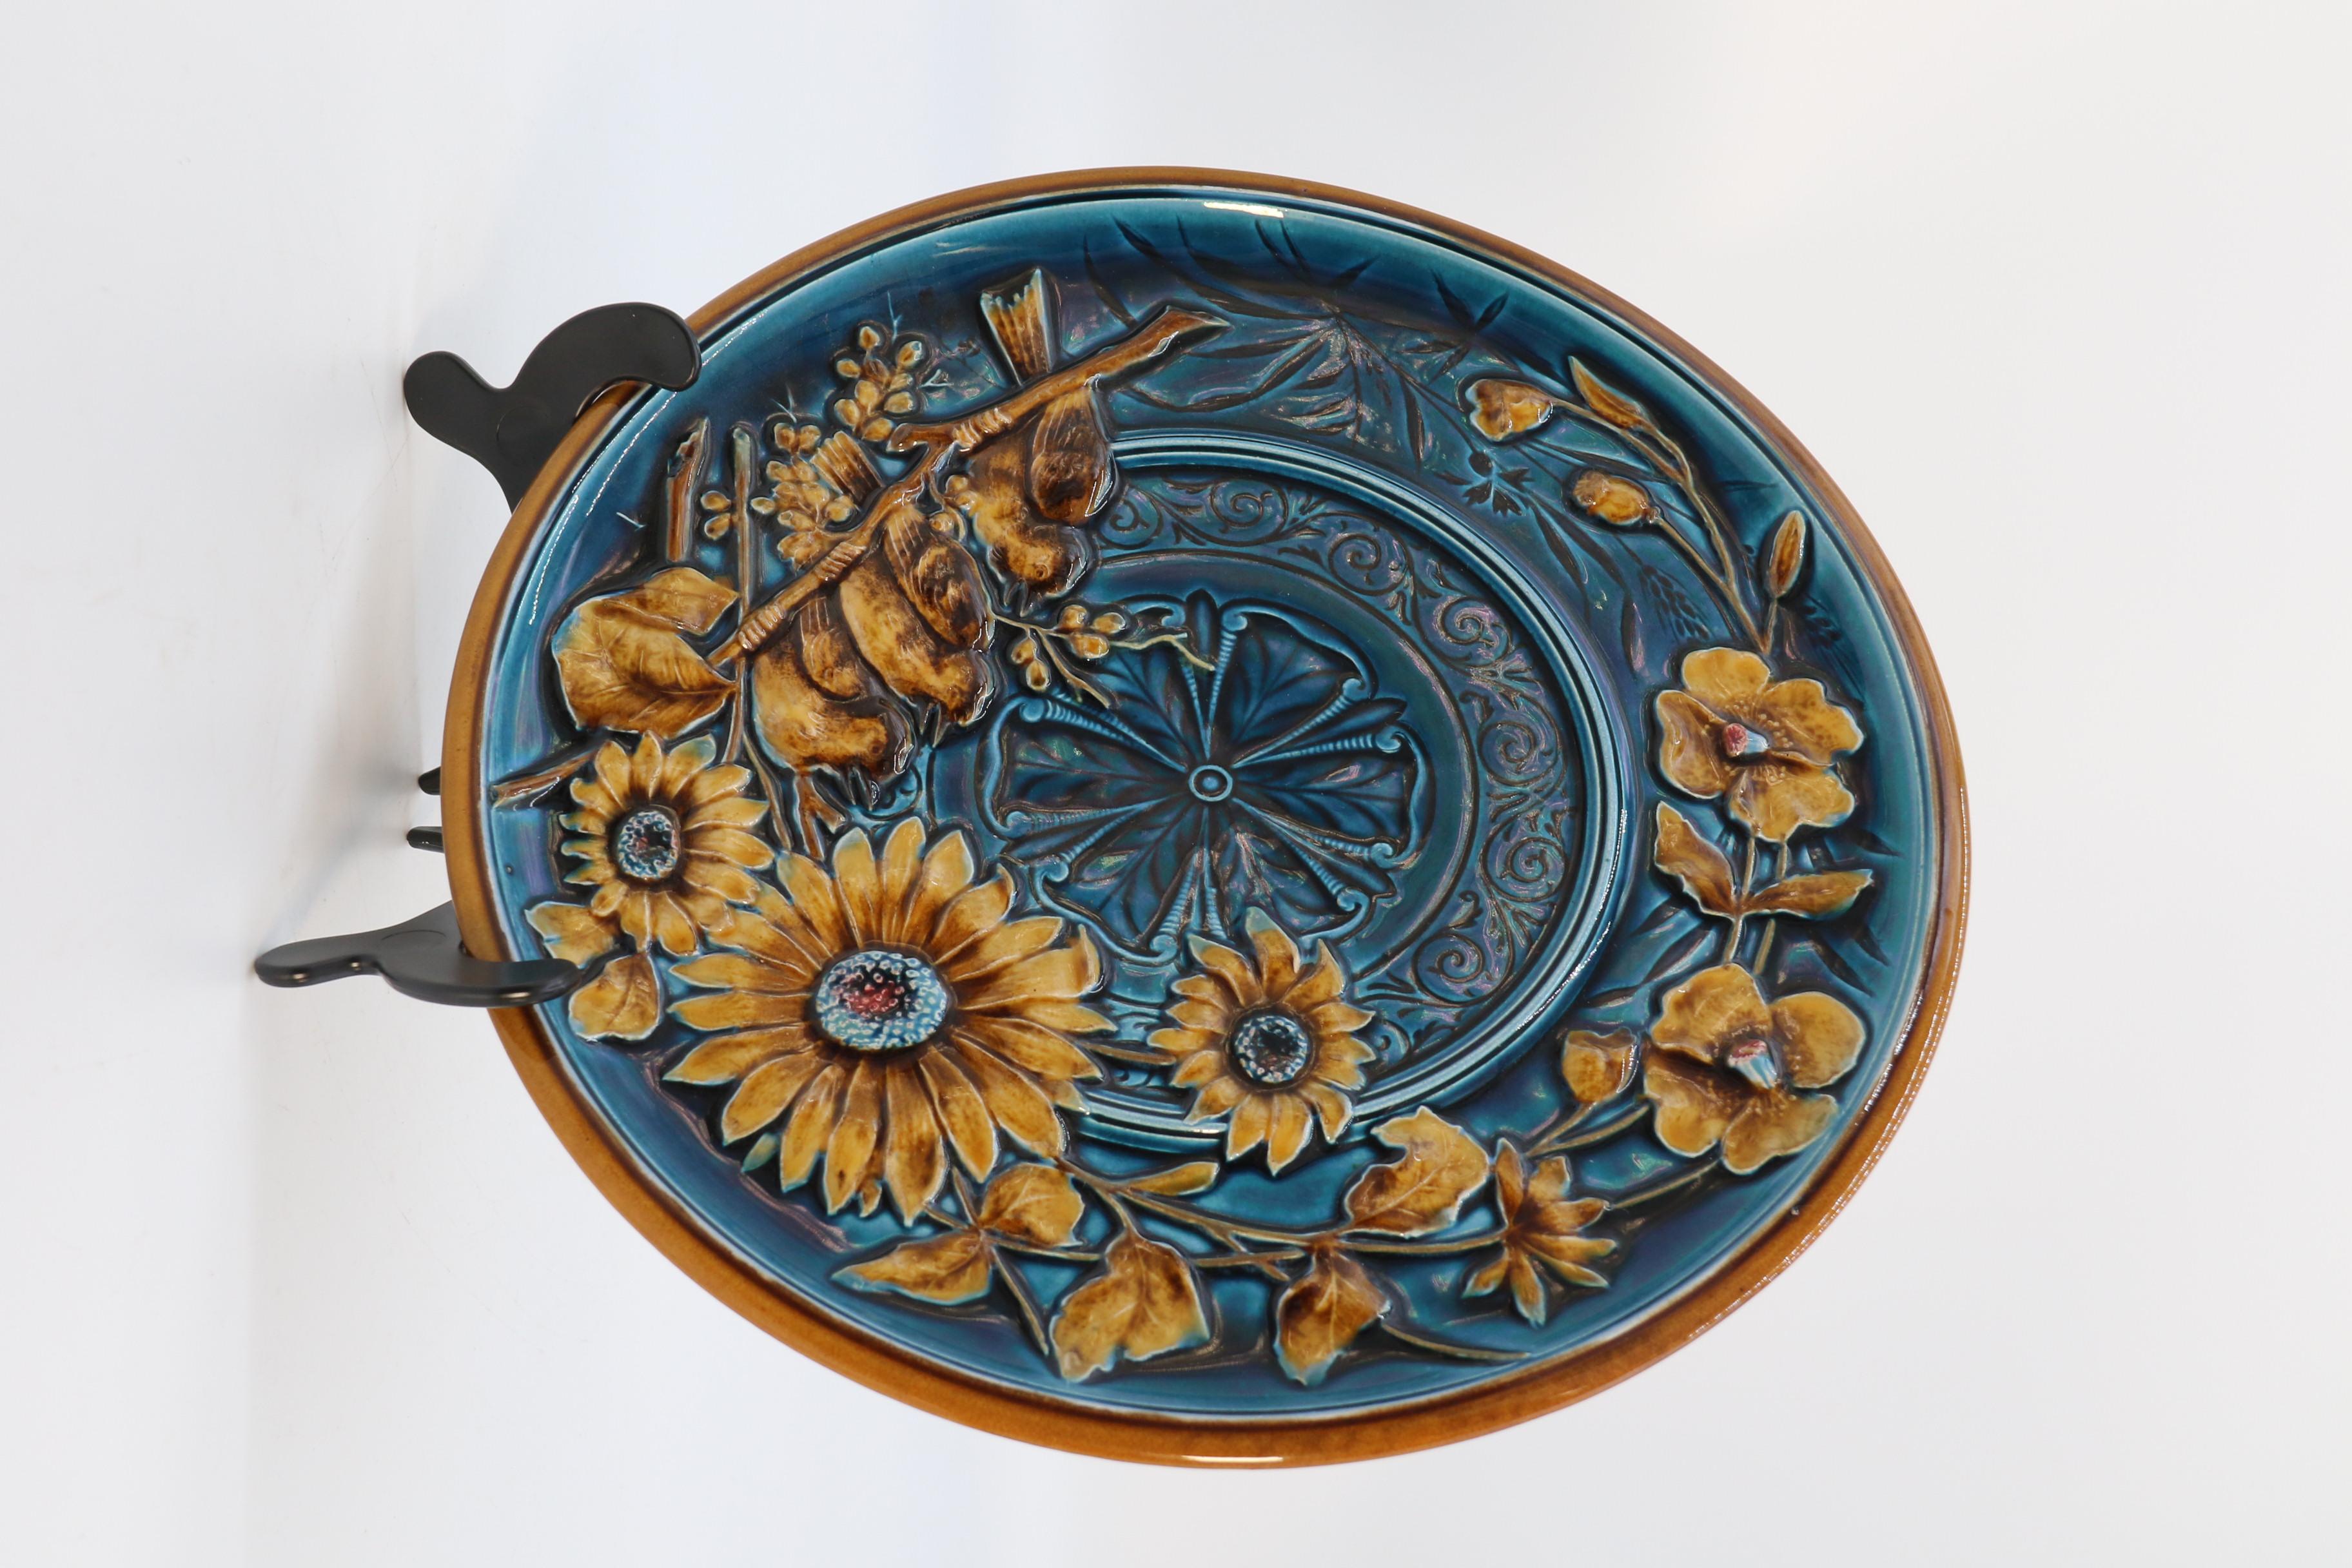 This rich three dimensionally decorated wall charger is a majolica pottery highly decorative example by the well regarded Austrian Gebruder Schutz factory. It is circular with a deep relief design of a naturalistic view of a row of three baby birds